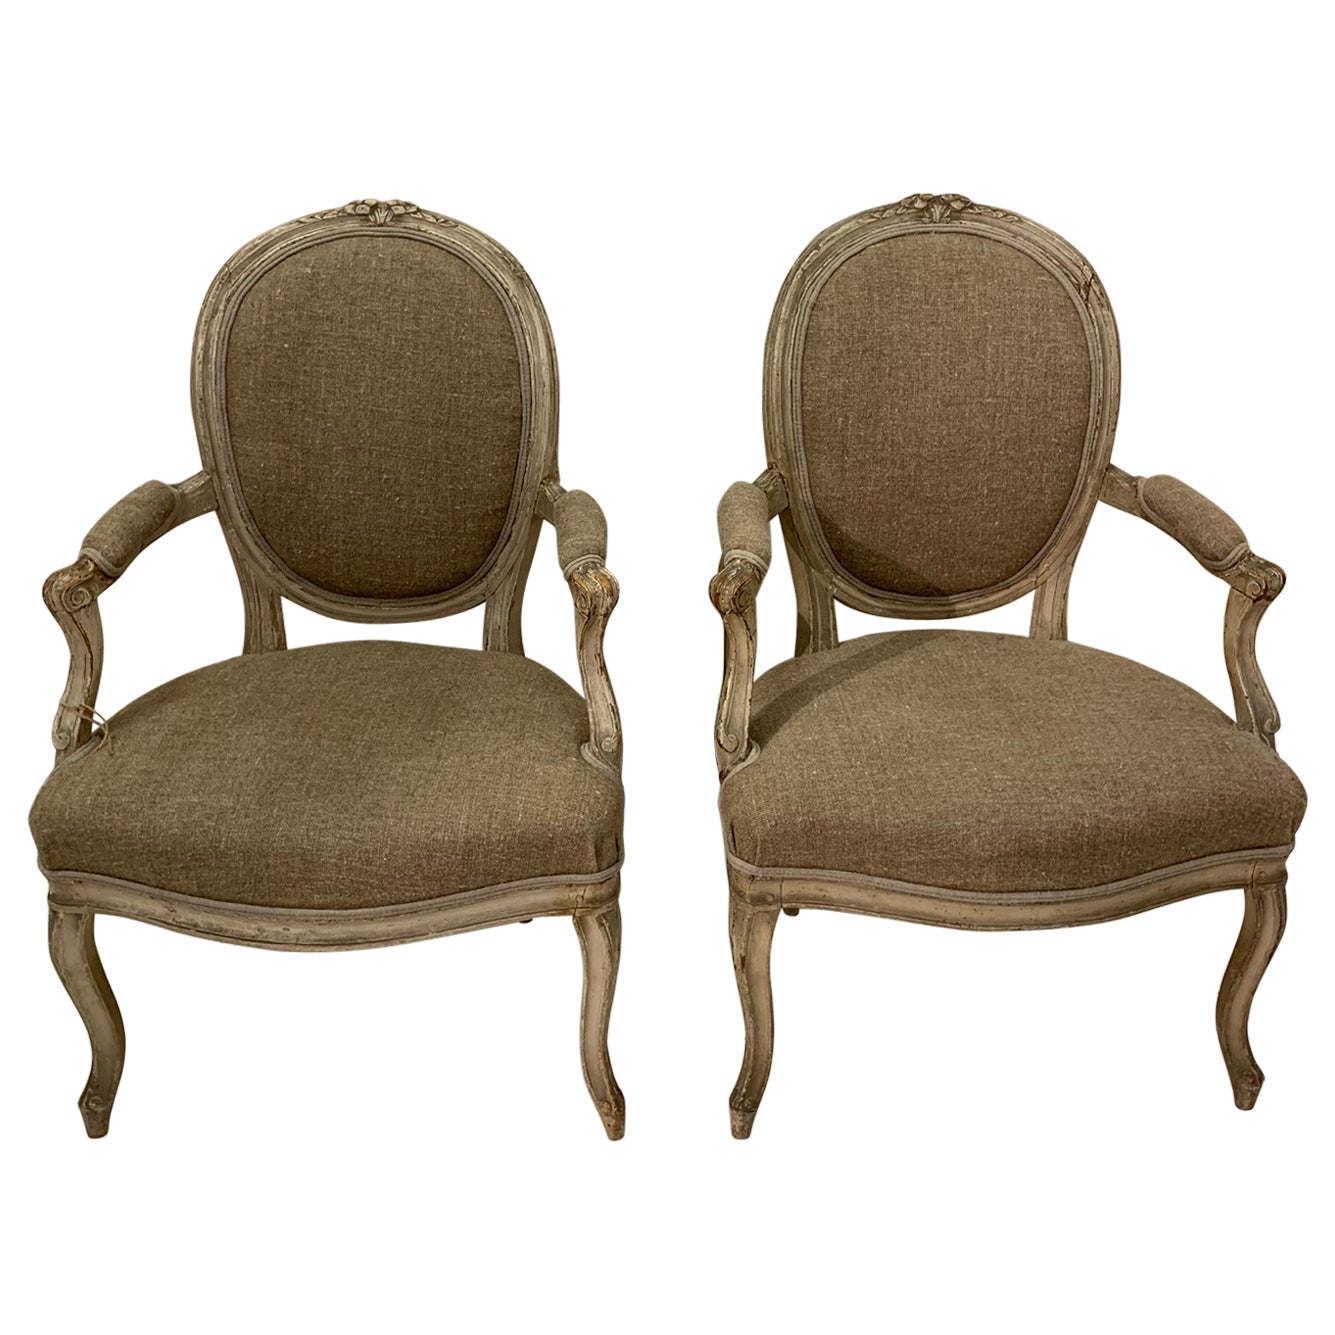 Pair of 19th Century French Fauteuils Louis XVI Style Upholstered Armchairs